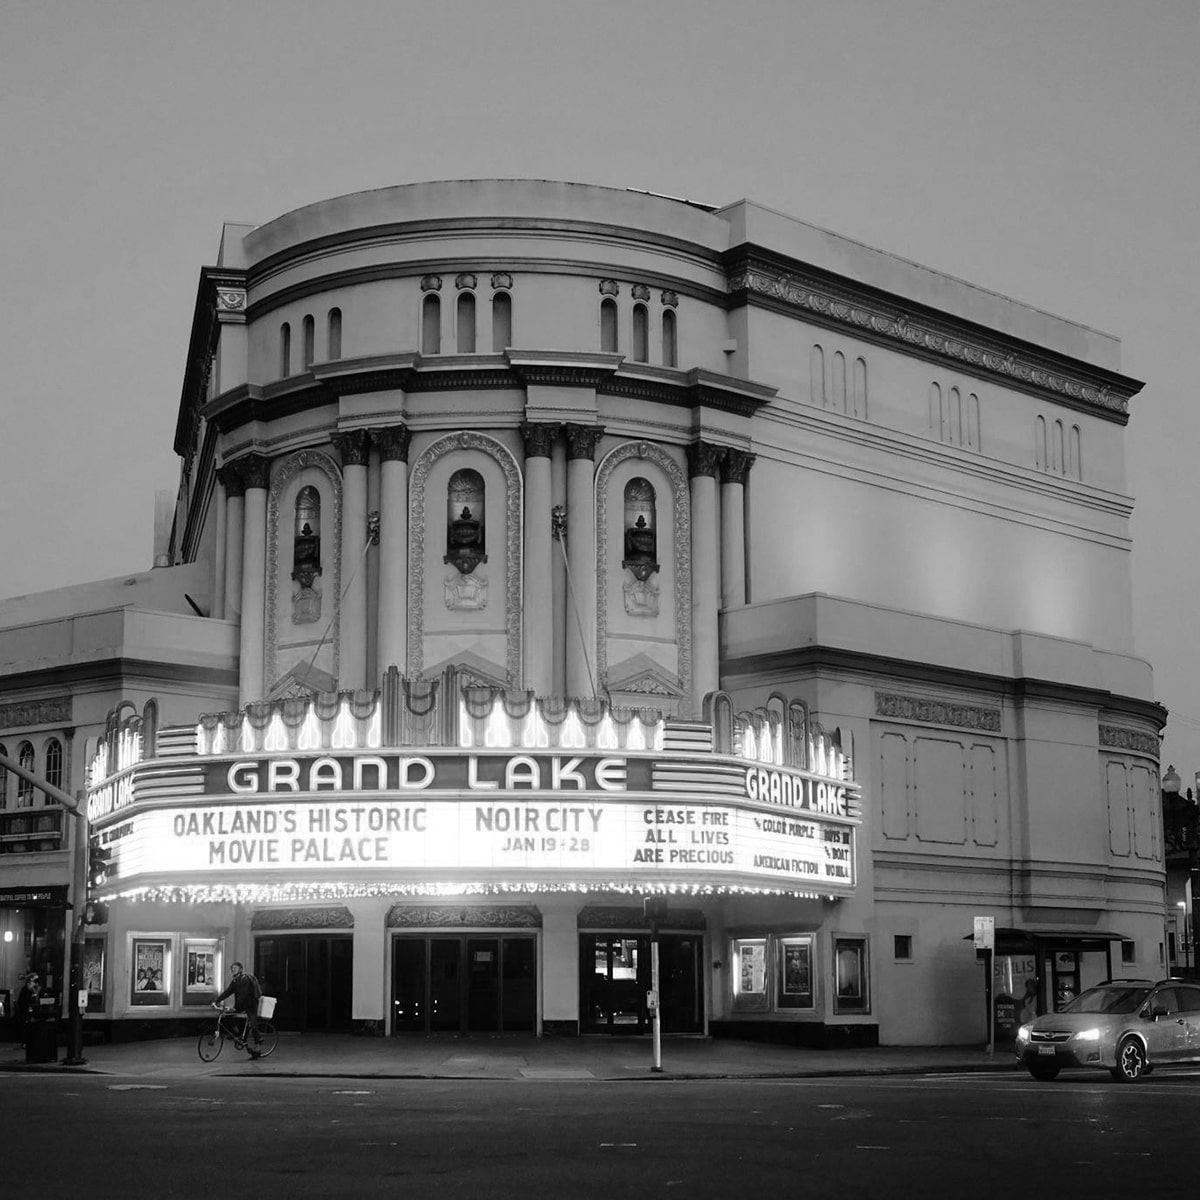 The historic Grand Lake theater